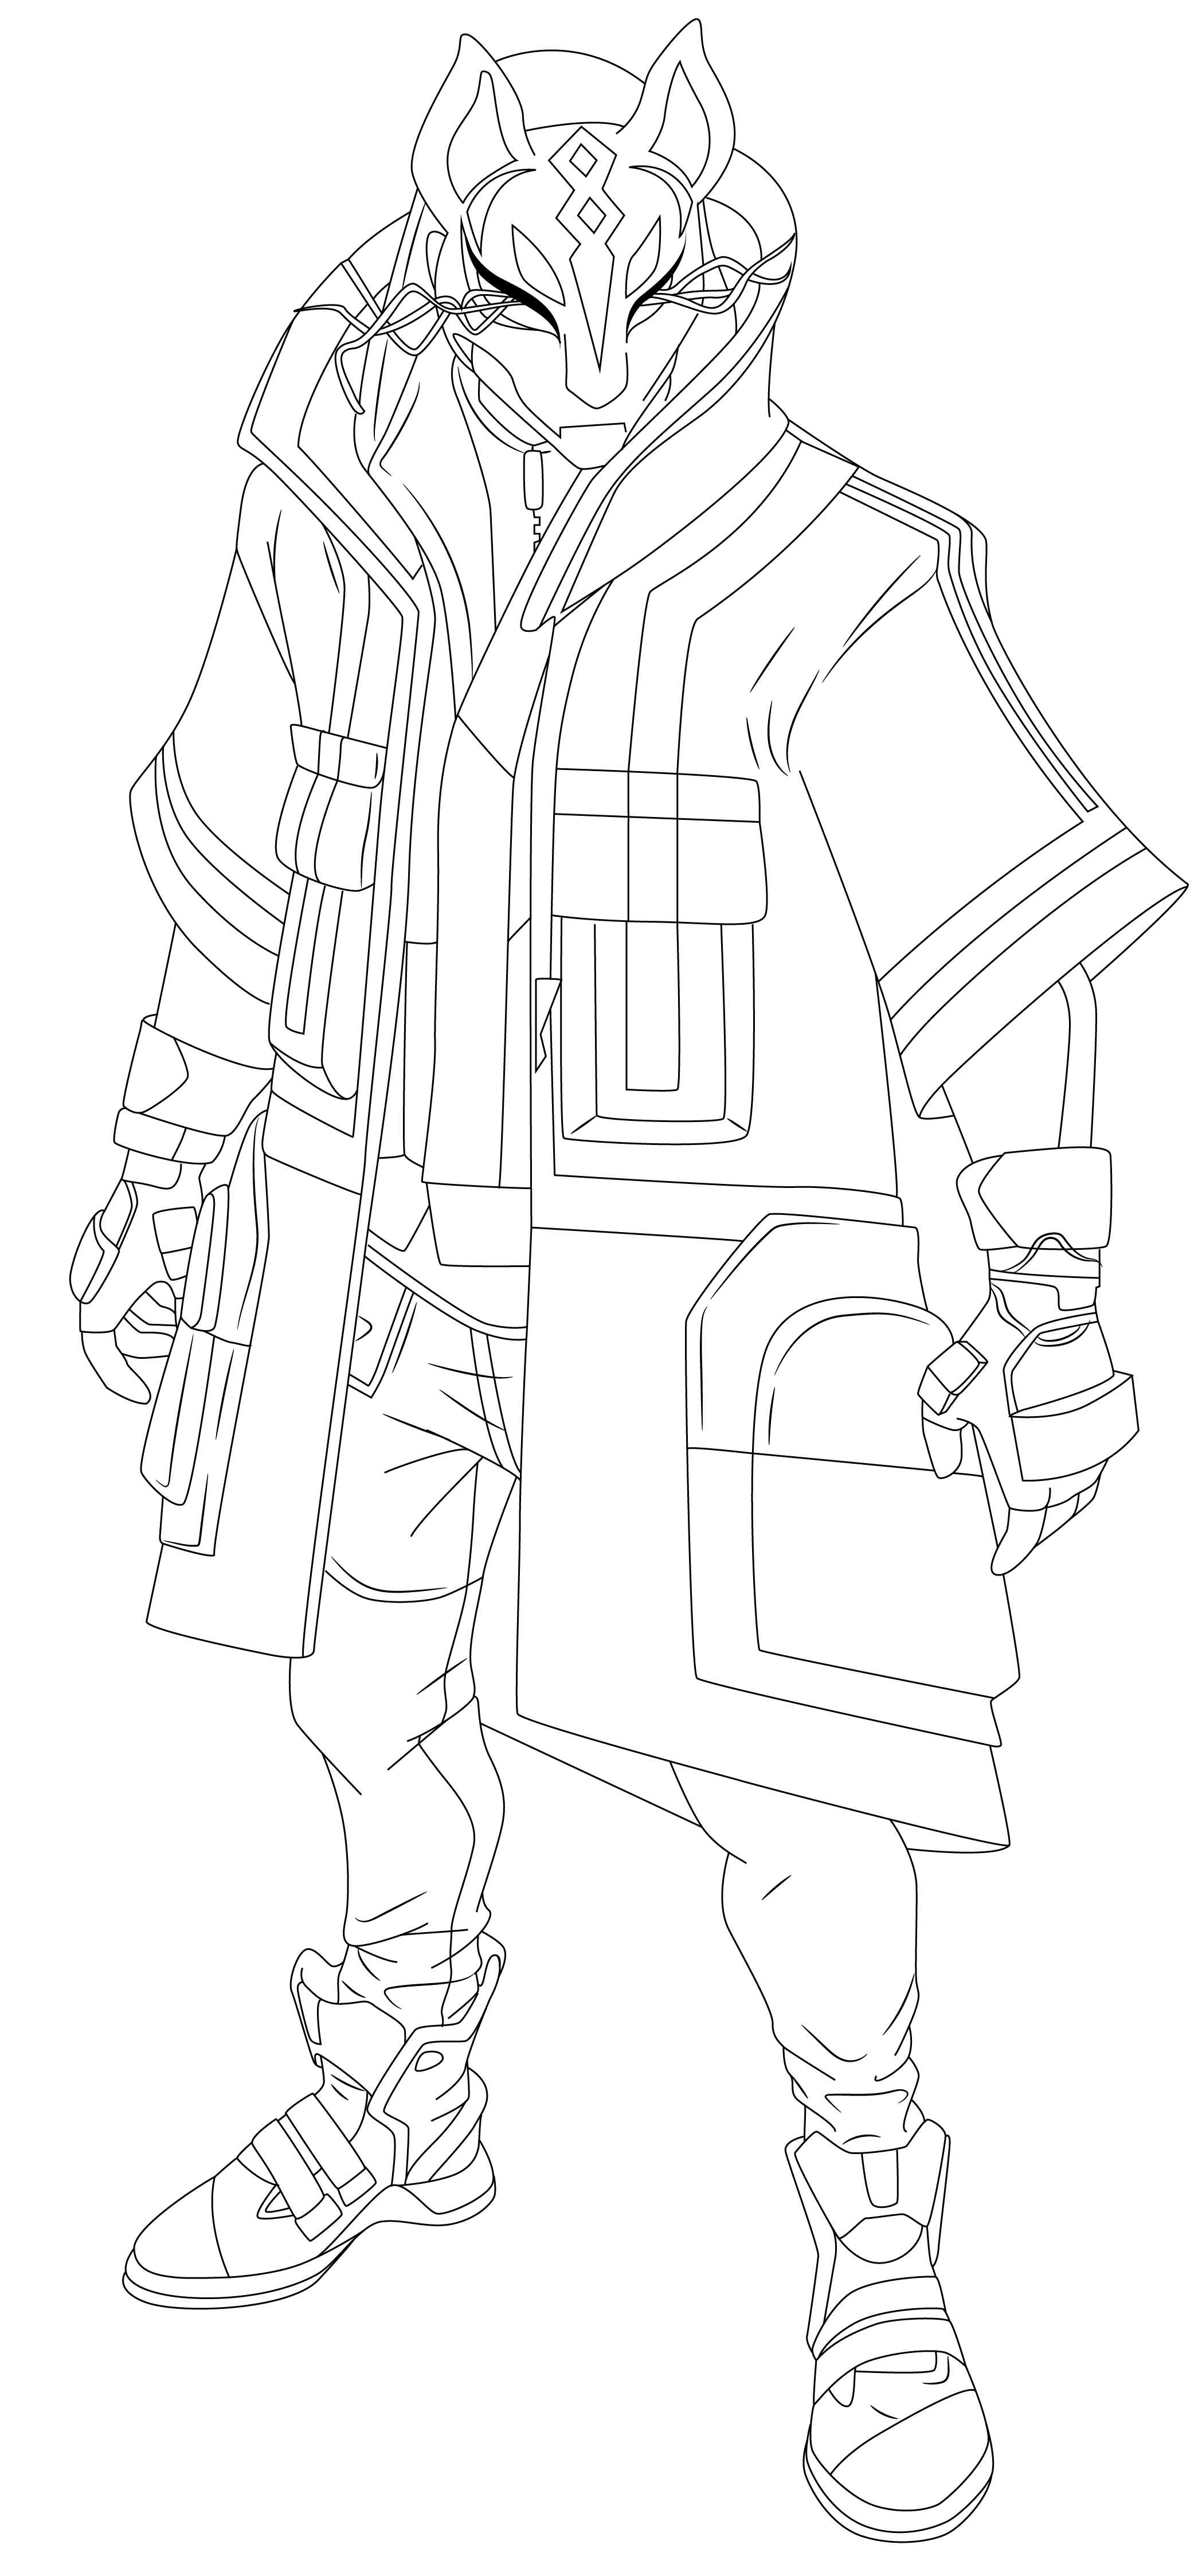 Drift Fortnite Hd Coloring Page